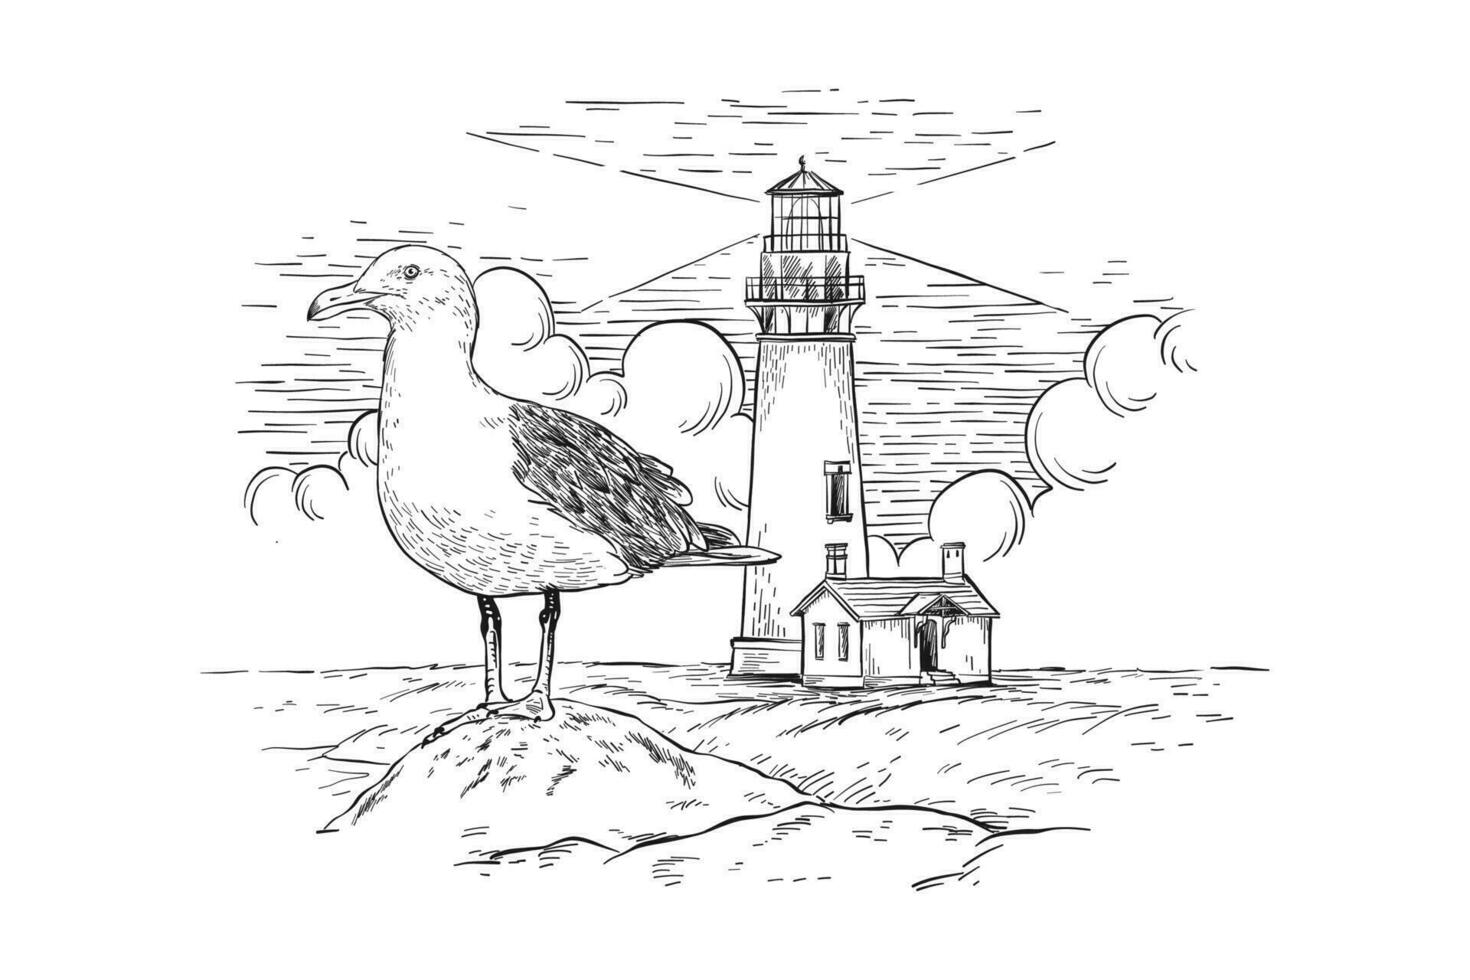 Lighthouse and seagull sketch vector illustration with artistic strokes